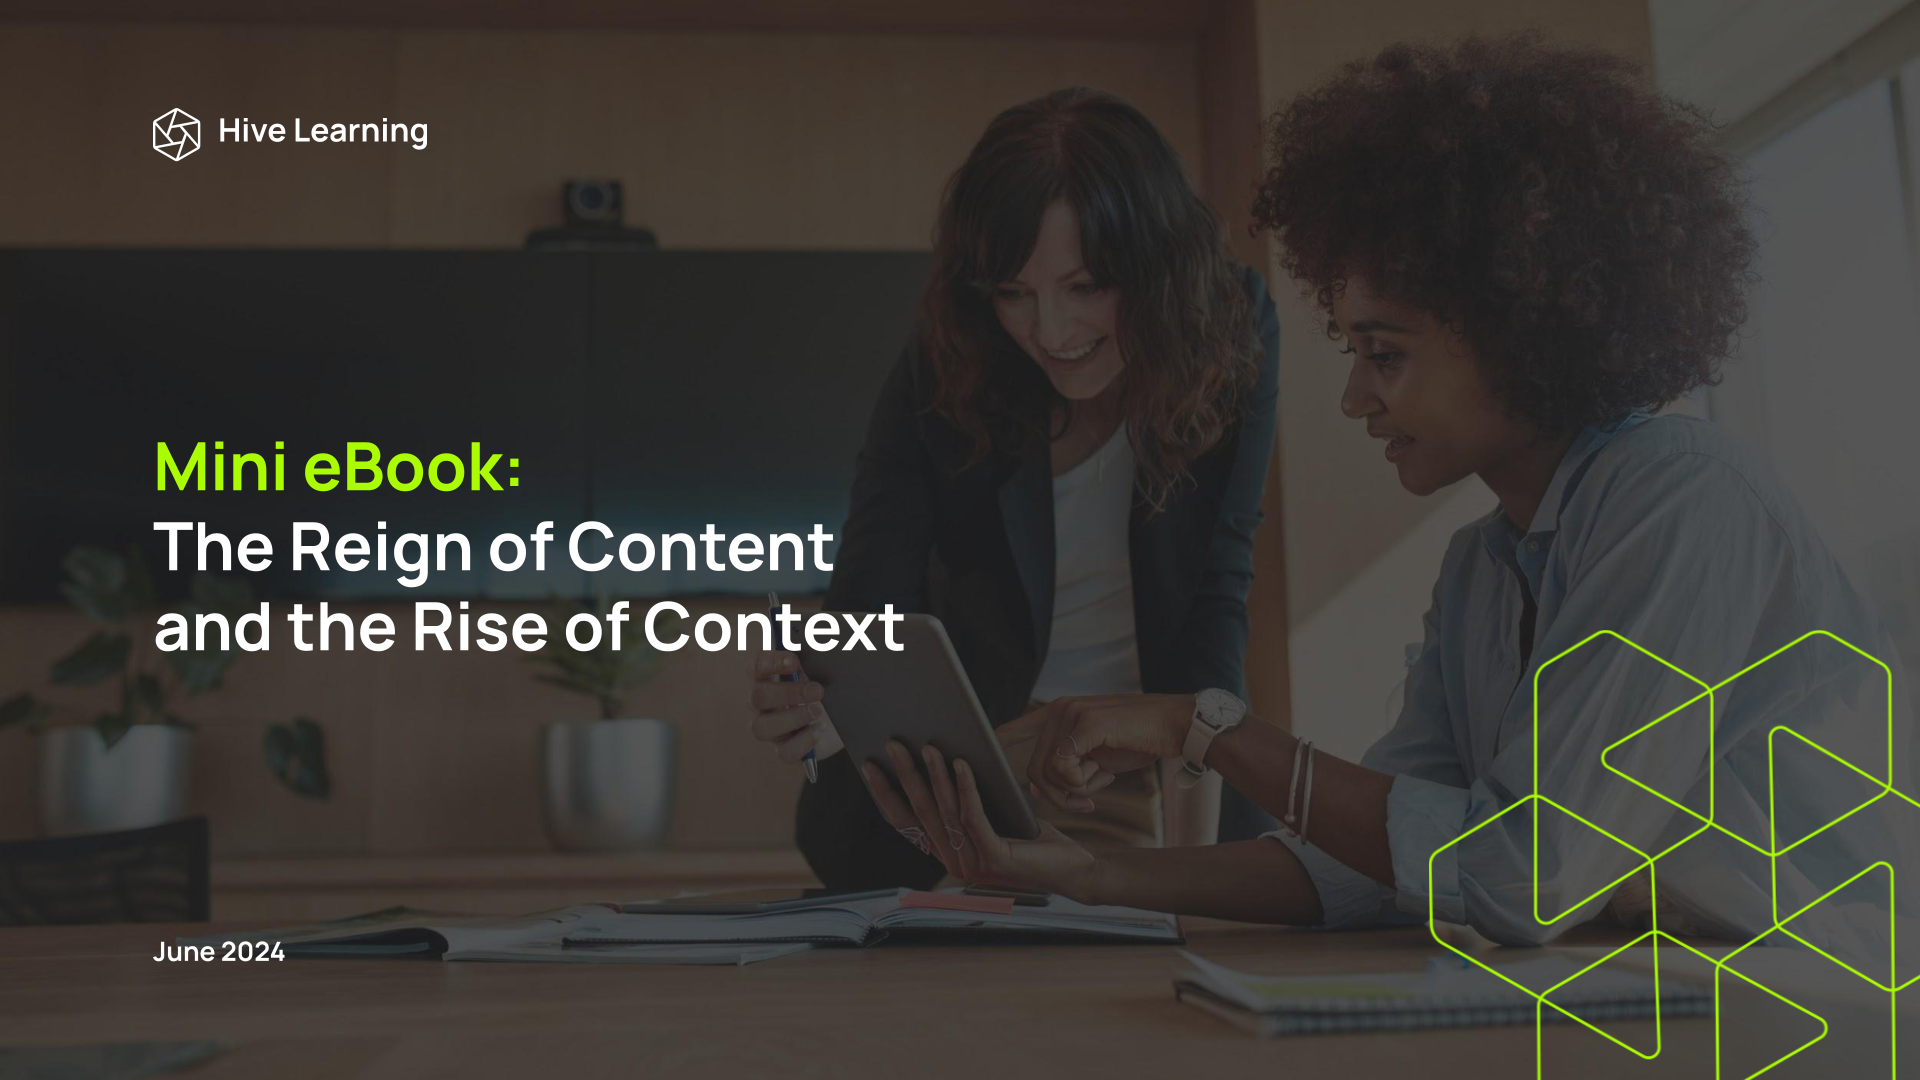 Mini eBook - The Reign of Content and the Rise of Context